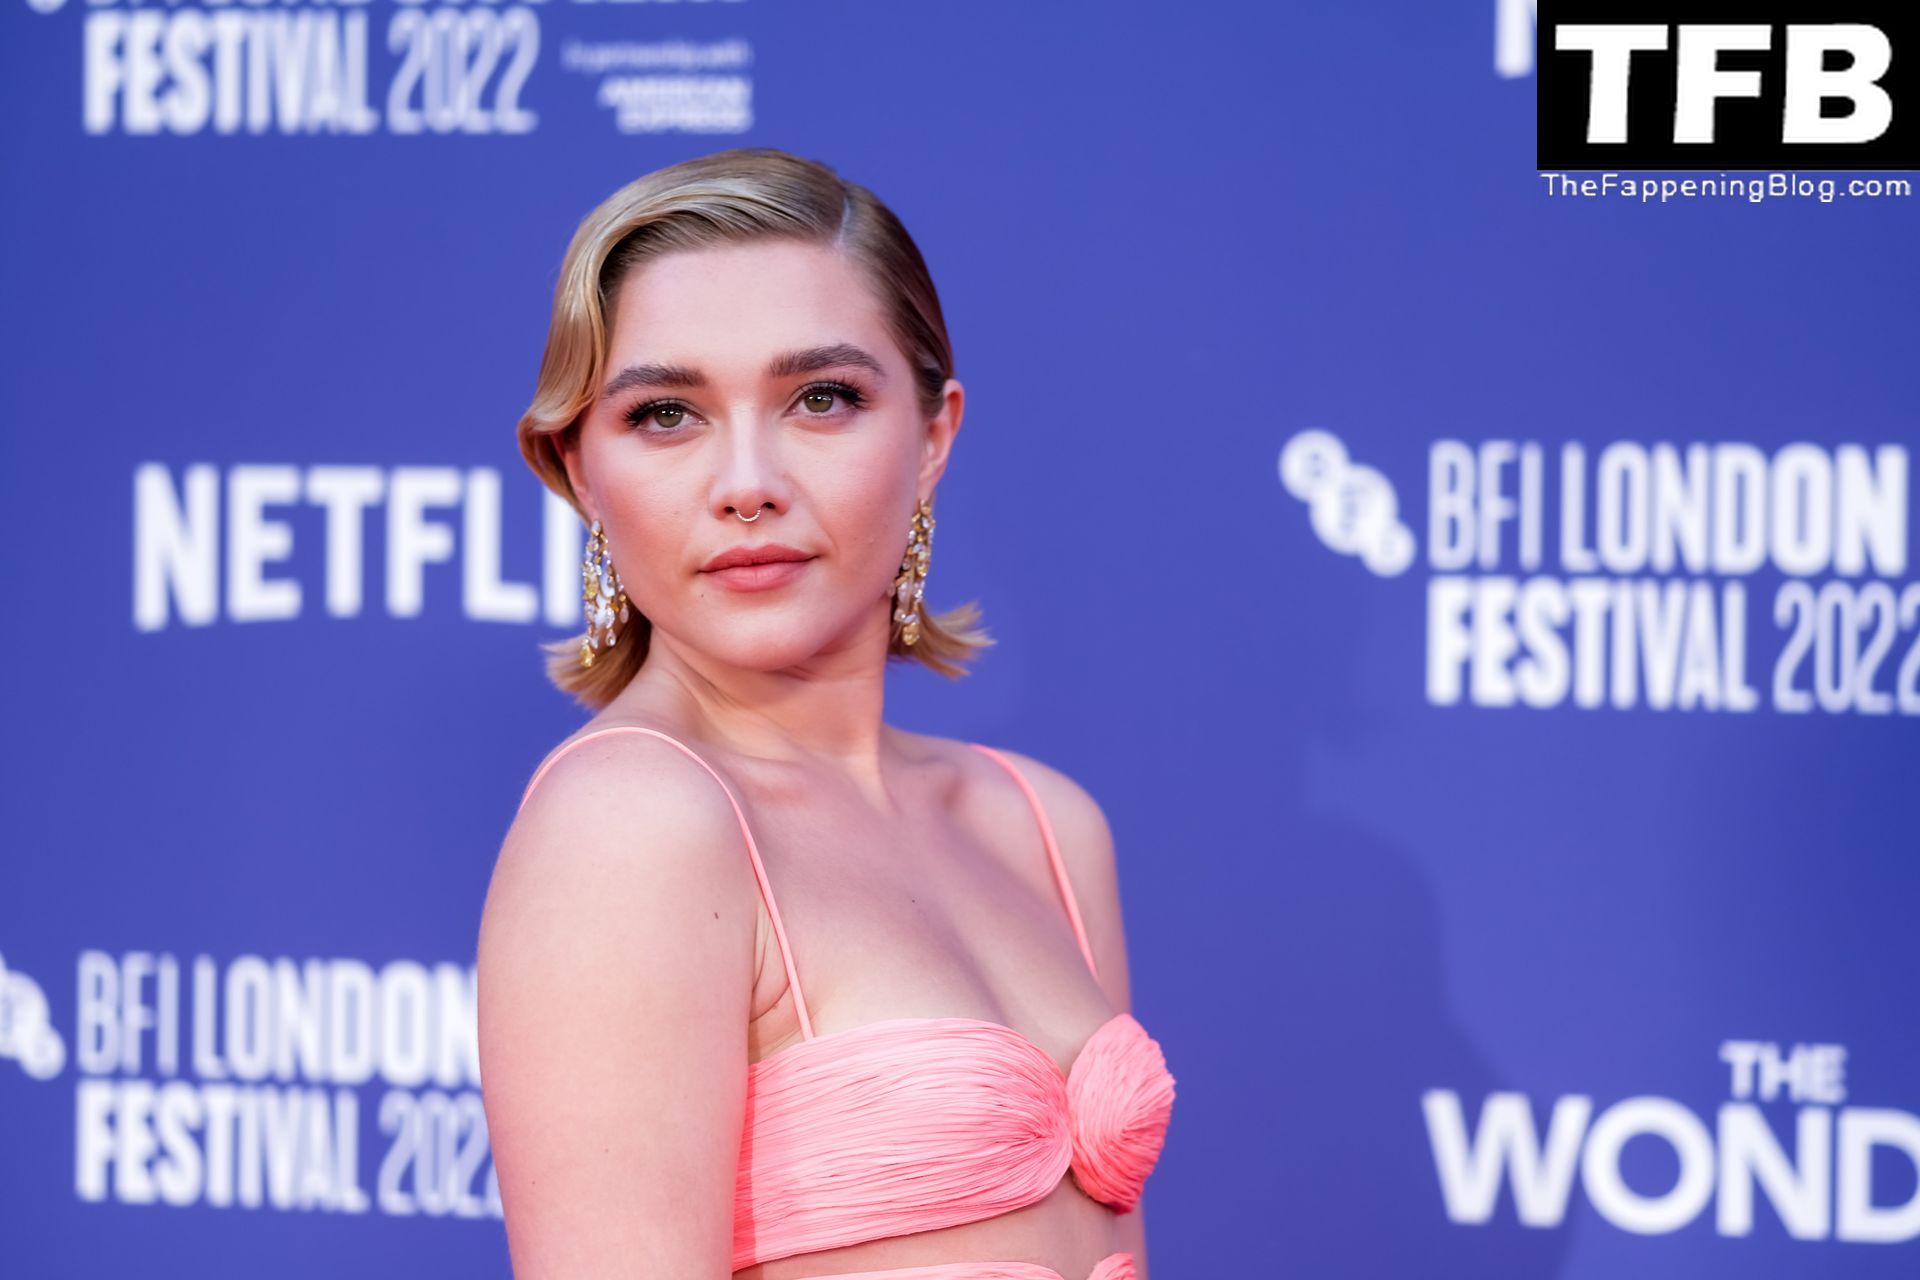 Florence-Pugh-Sexy-The-Fappening-Blog-140.jpg